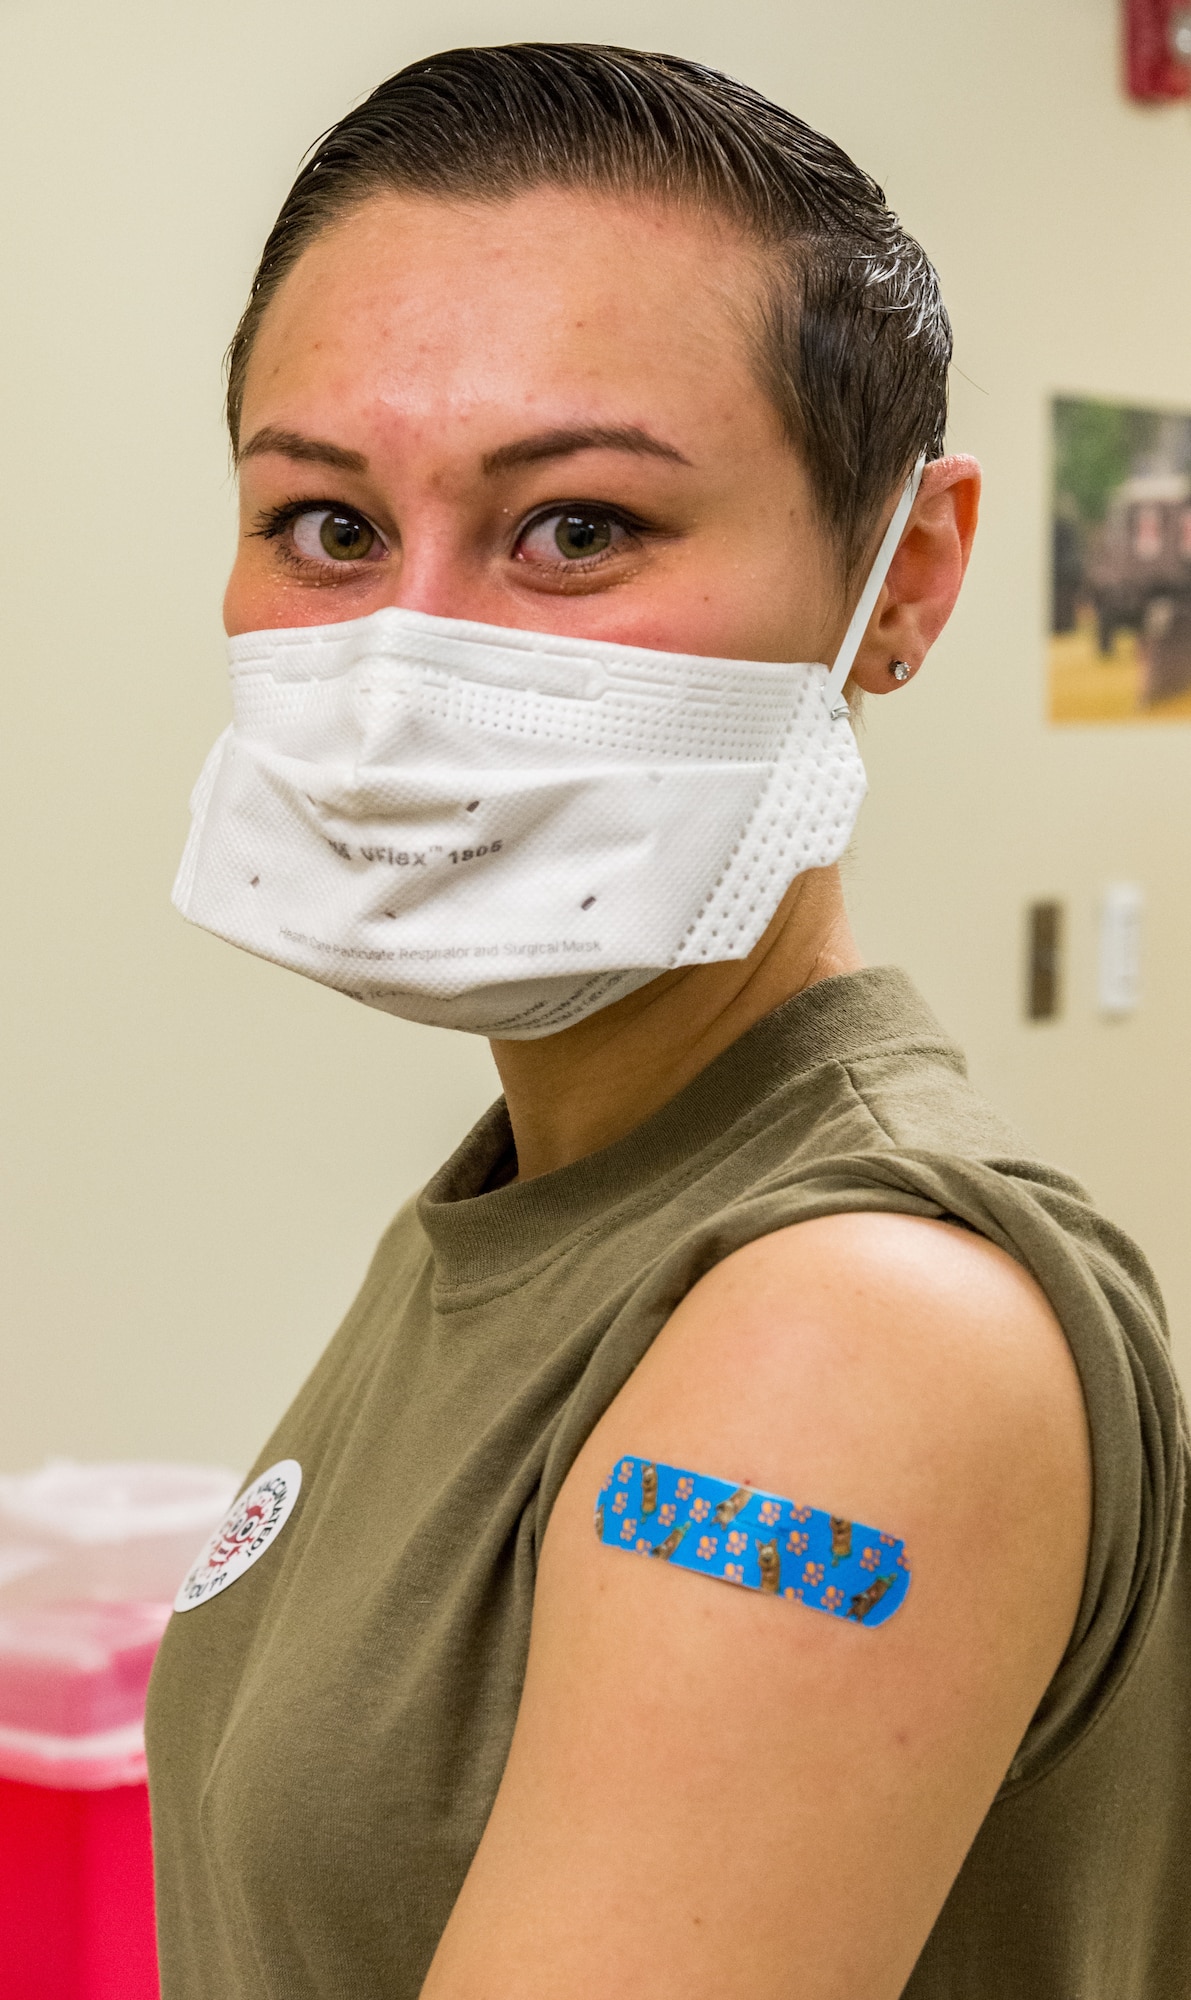 Senior Airman Bianca Robichaud, 436th Health Care Operations Squadron acting family health noncommissioned officer in charge, poses for a photo after receiving the COVID-19 vaccine administered by Staff Sgt. Kelsey Loeser, 436th 436th Medical Group unit training manager, Jan. 15, 2021, at Dover Air Force Base, Delaware. Robichaud was the first person on Dover AFB to receive the COVID-19 vaccine. The vaccine was granted emergency use authorization by the U.S. Food and Drug Administration for use in prevention of the COVID-19. (U.S. Air Force photo by Roland Balik)